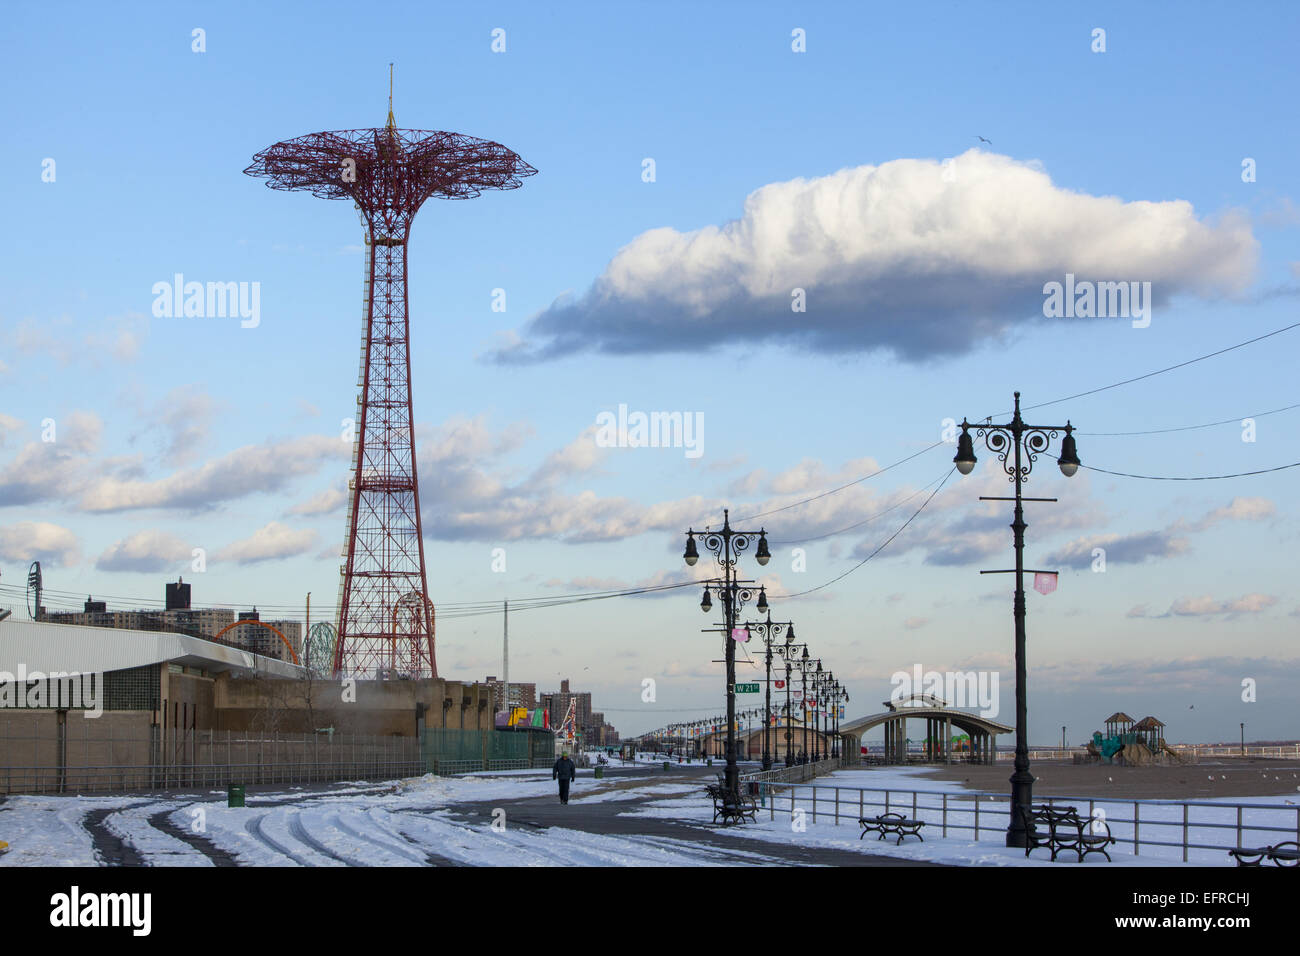 Winter on the Boardwalk at Coney Island with the ever present Parachute Jump piercing the sky. Stock Photo